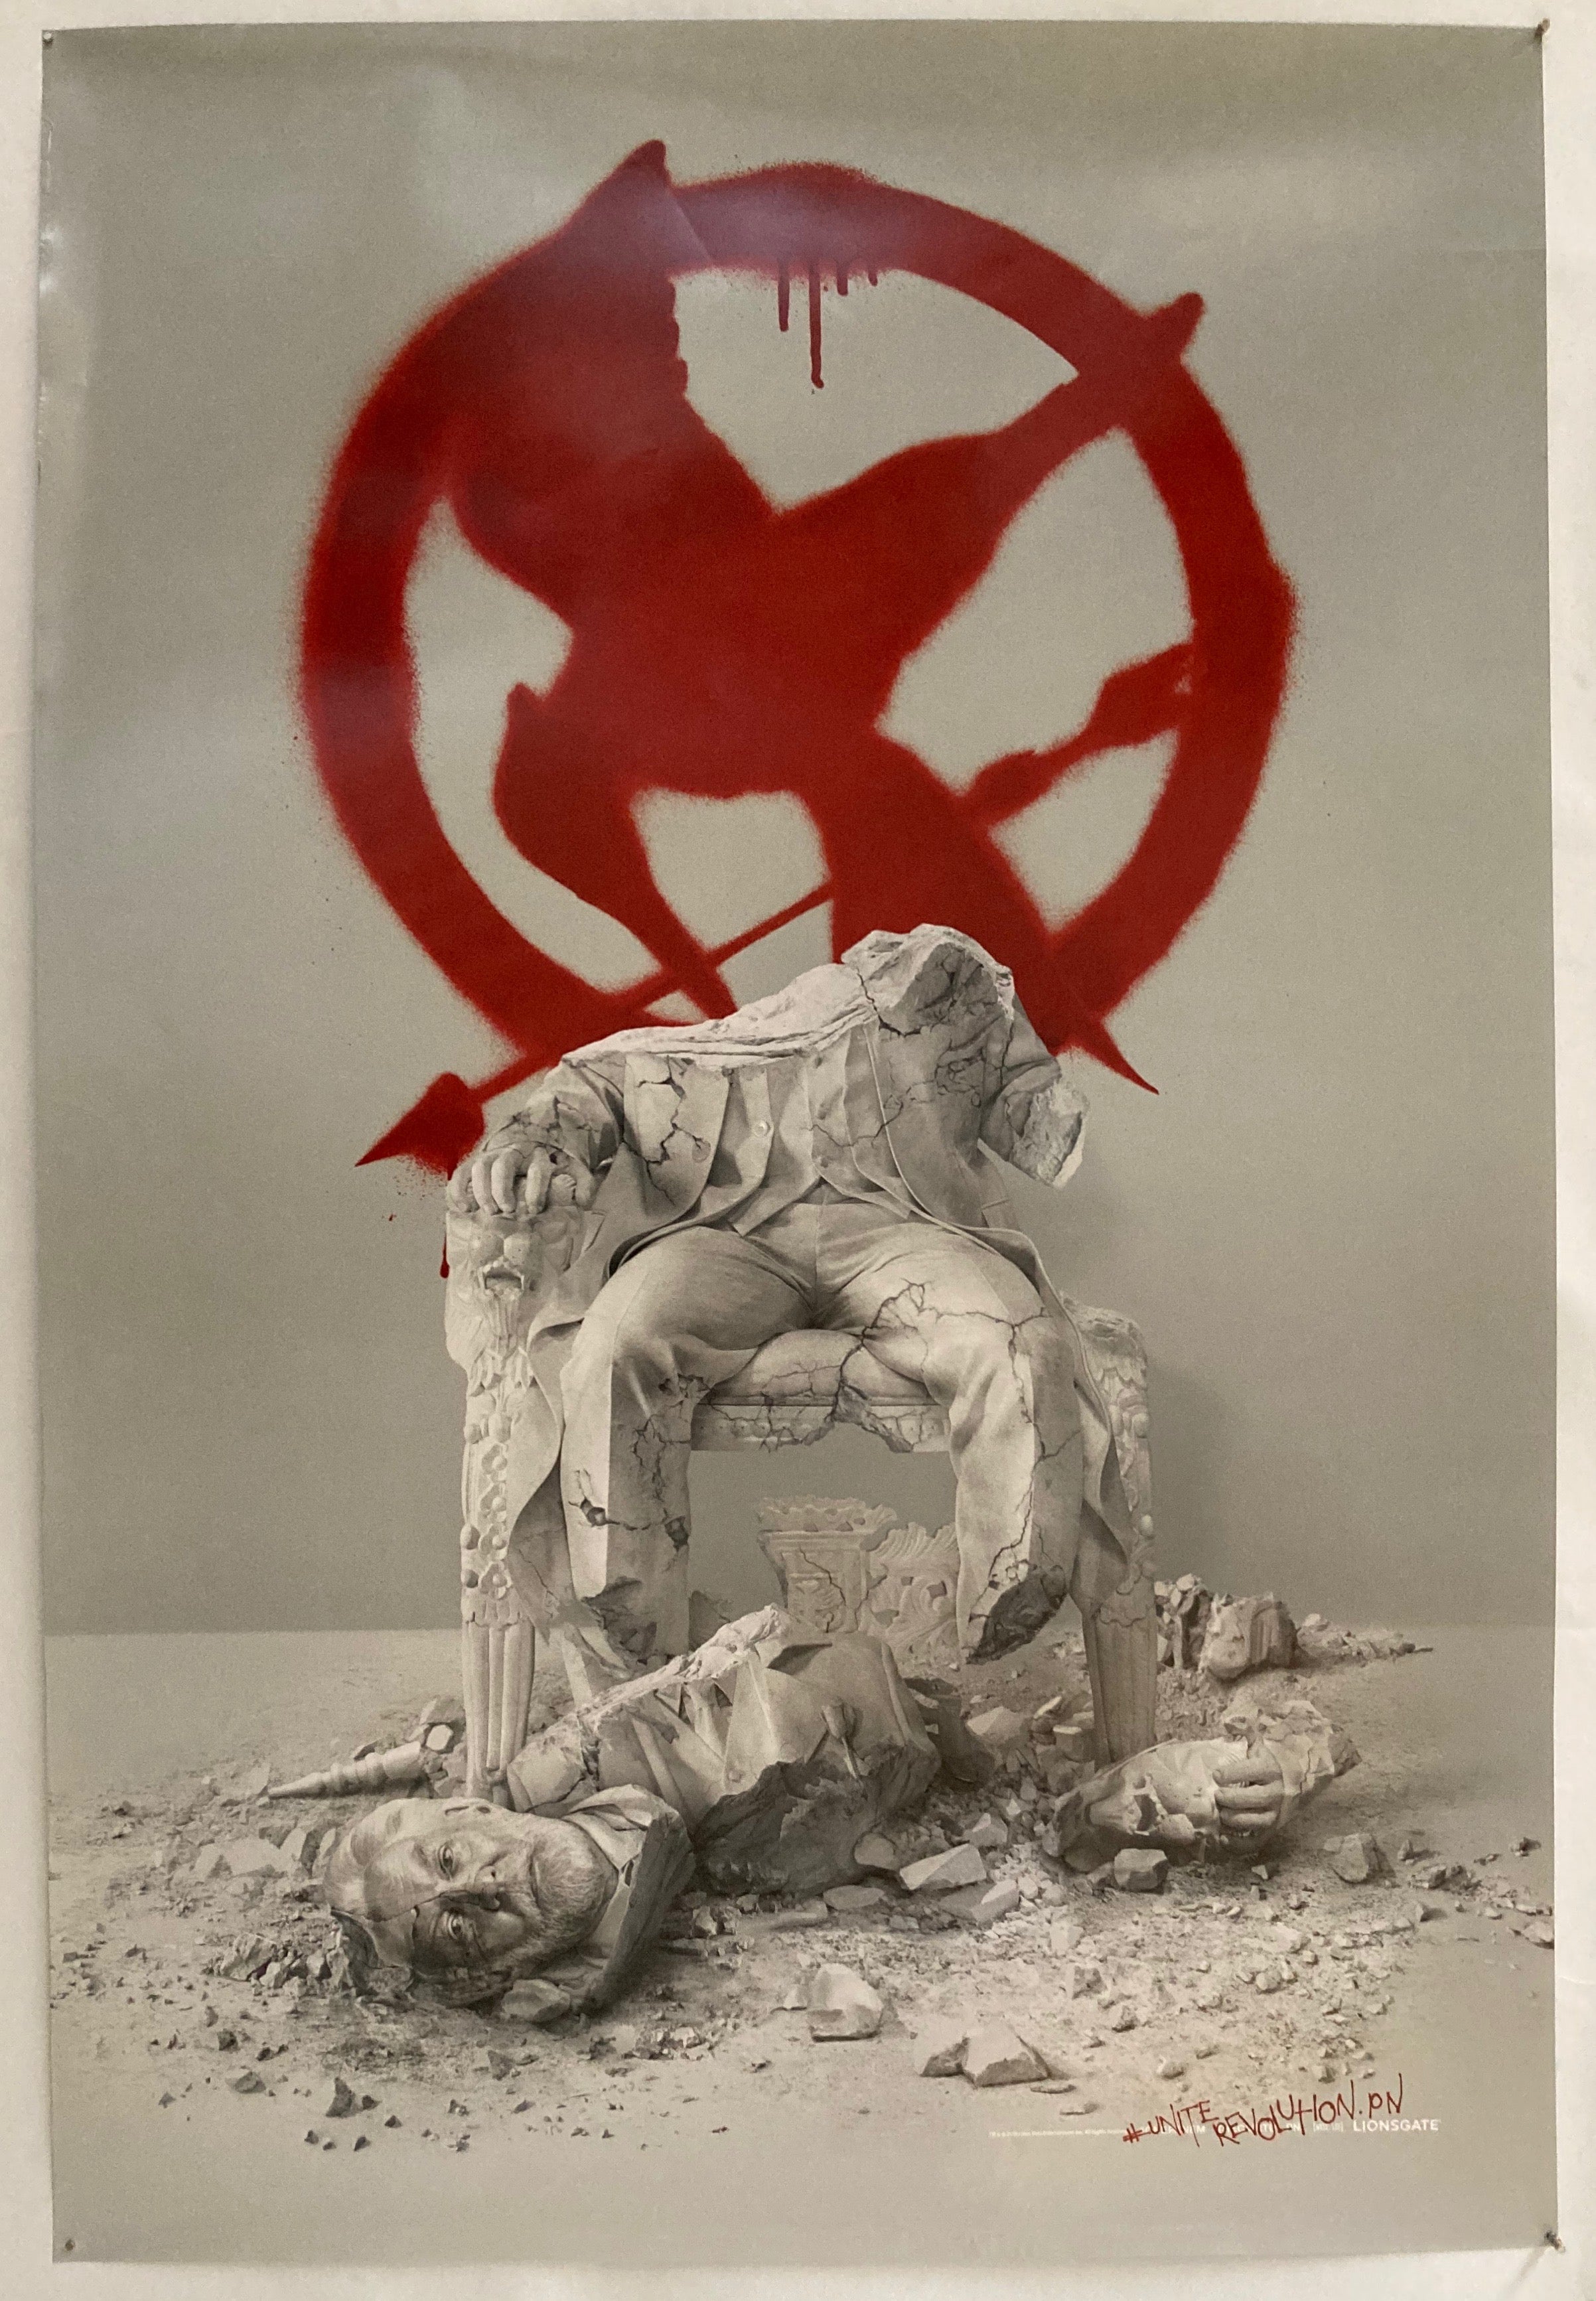 The Hunger Games: Mockingjay - Part 2 Movie Poster (#1 of 29